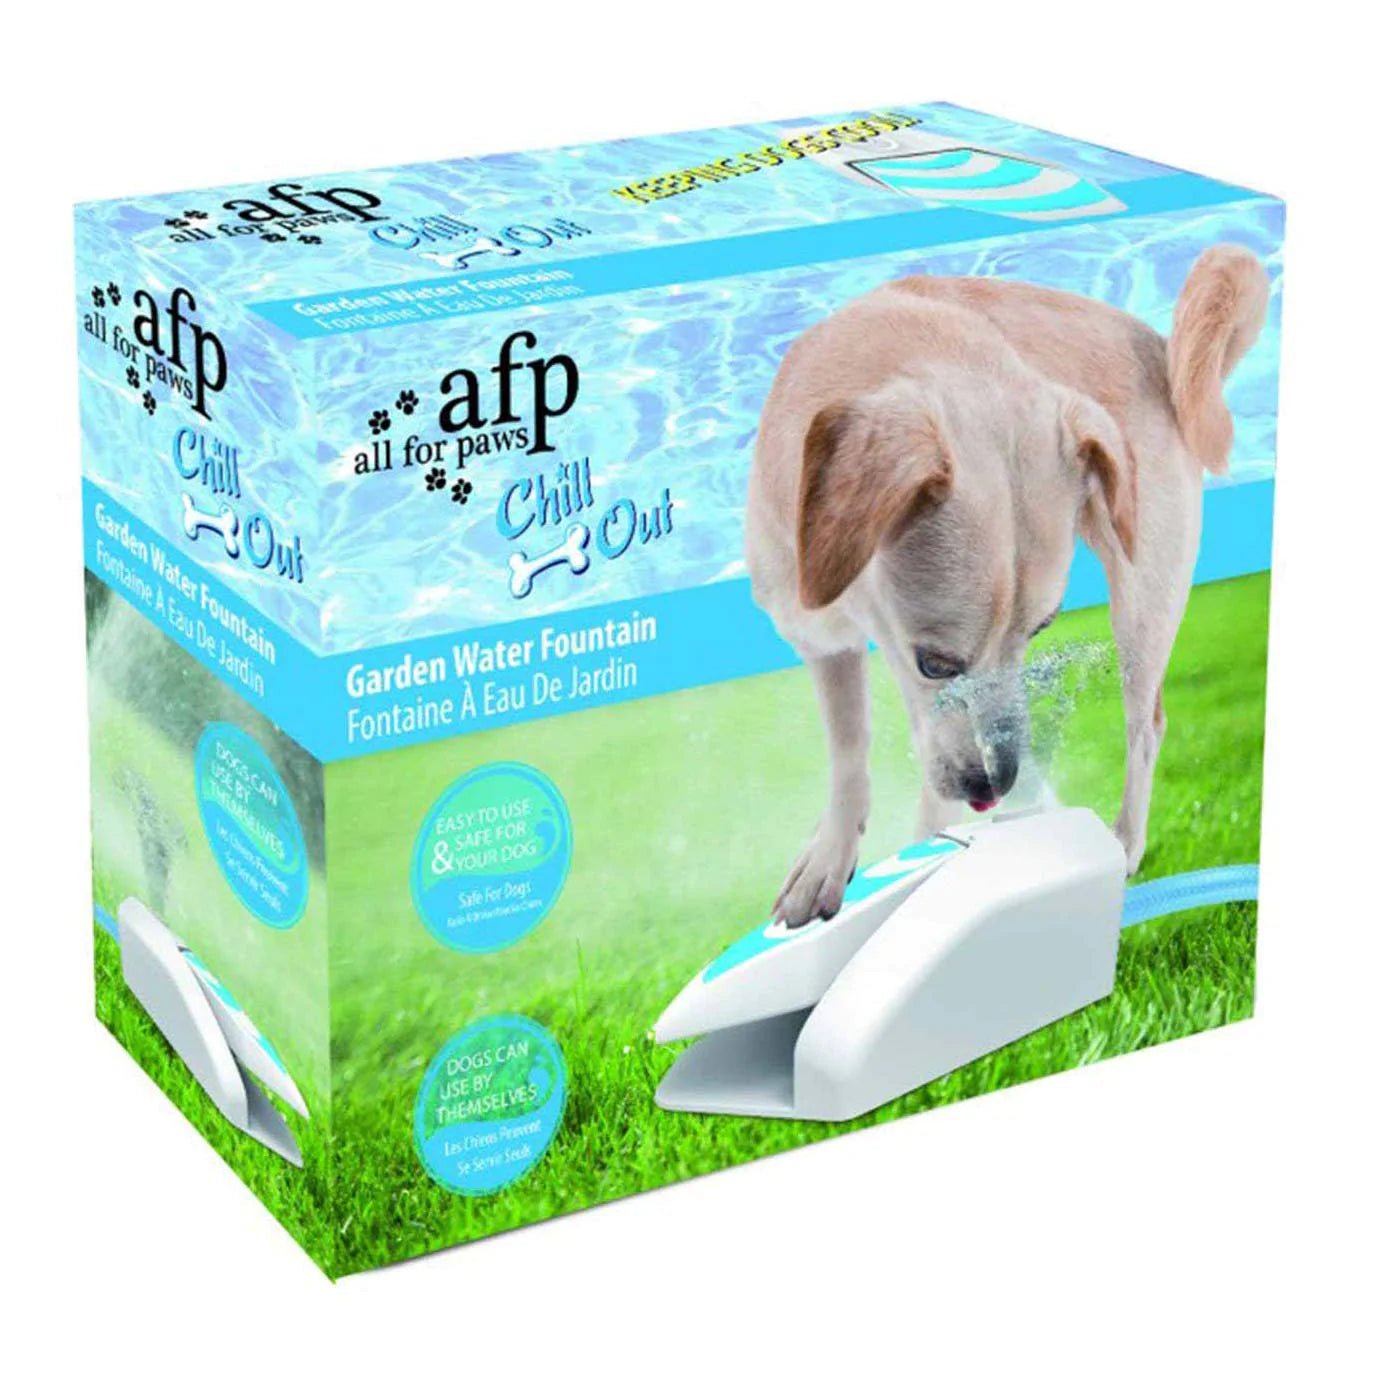 ALL FOR PAWS Chill Out Garden Water Fountain - Pets Villa